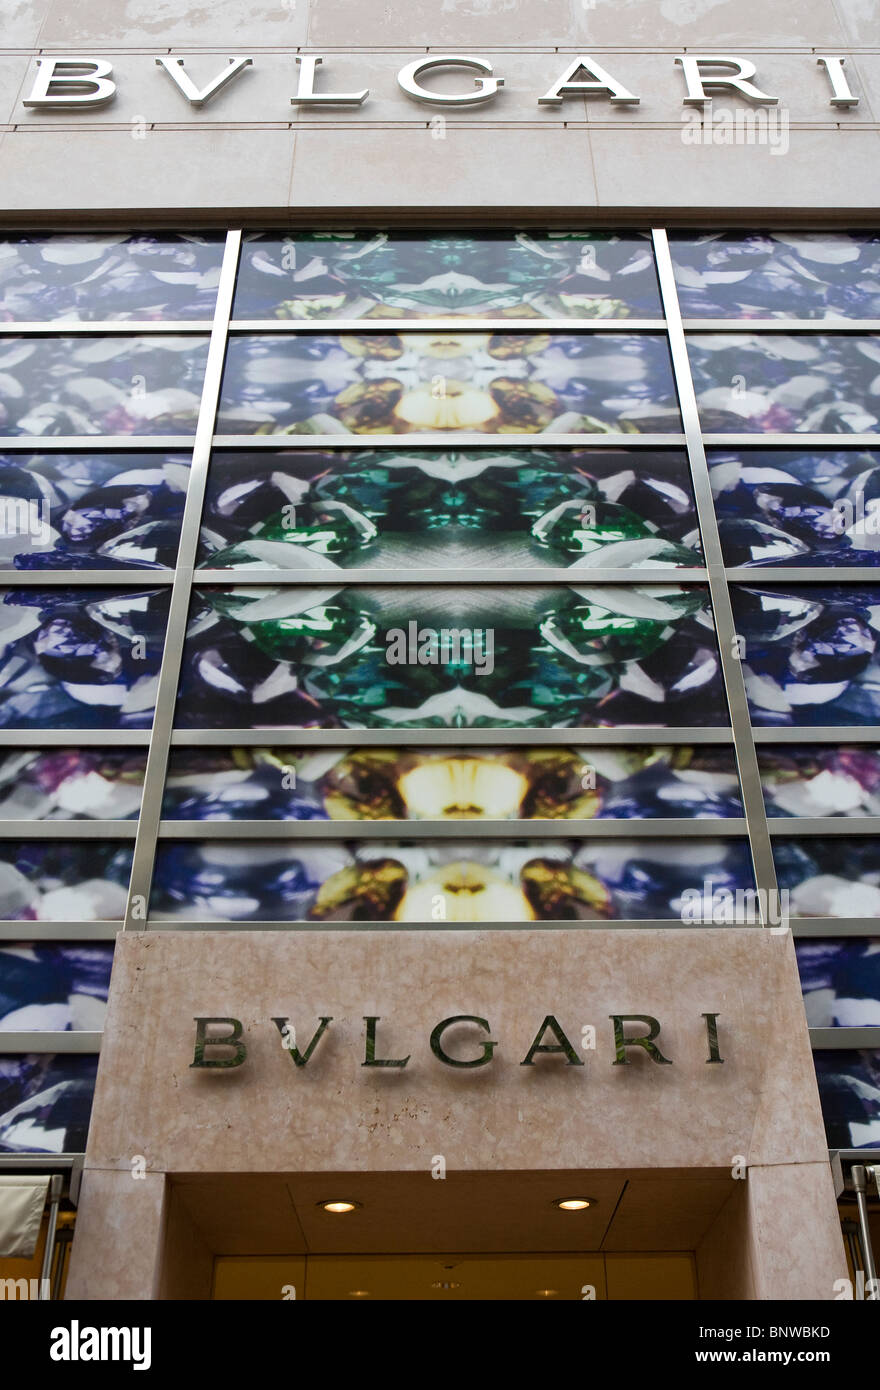 Michael Kors and Bvlgari Stores. in the Mall at Millenia 1 Editorial Image  - Image of fashion, bulgari: 152776680